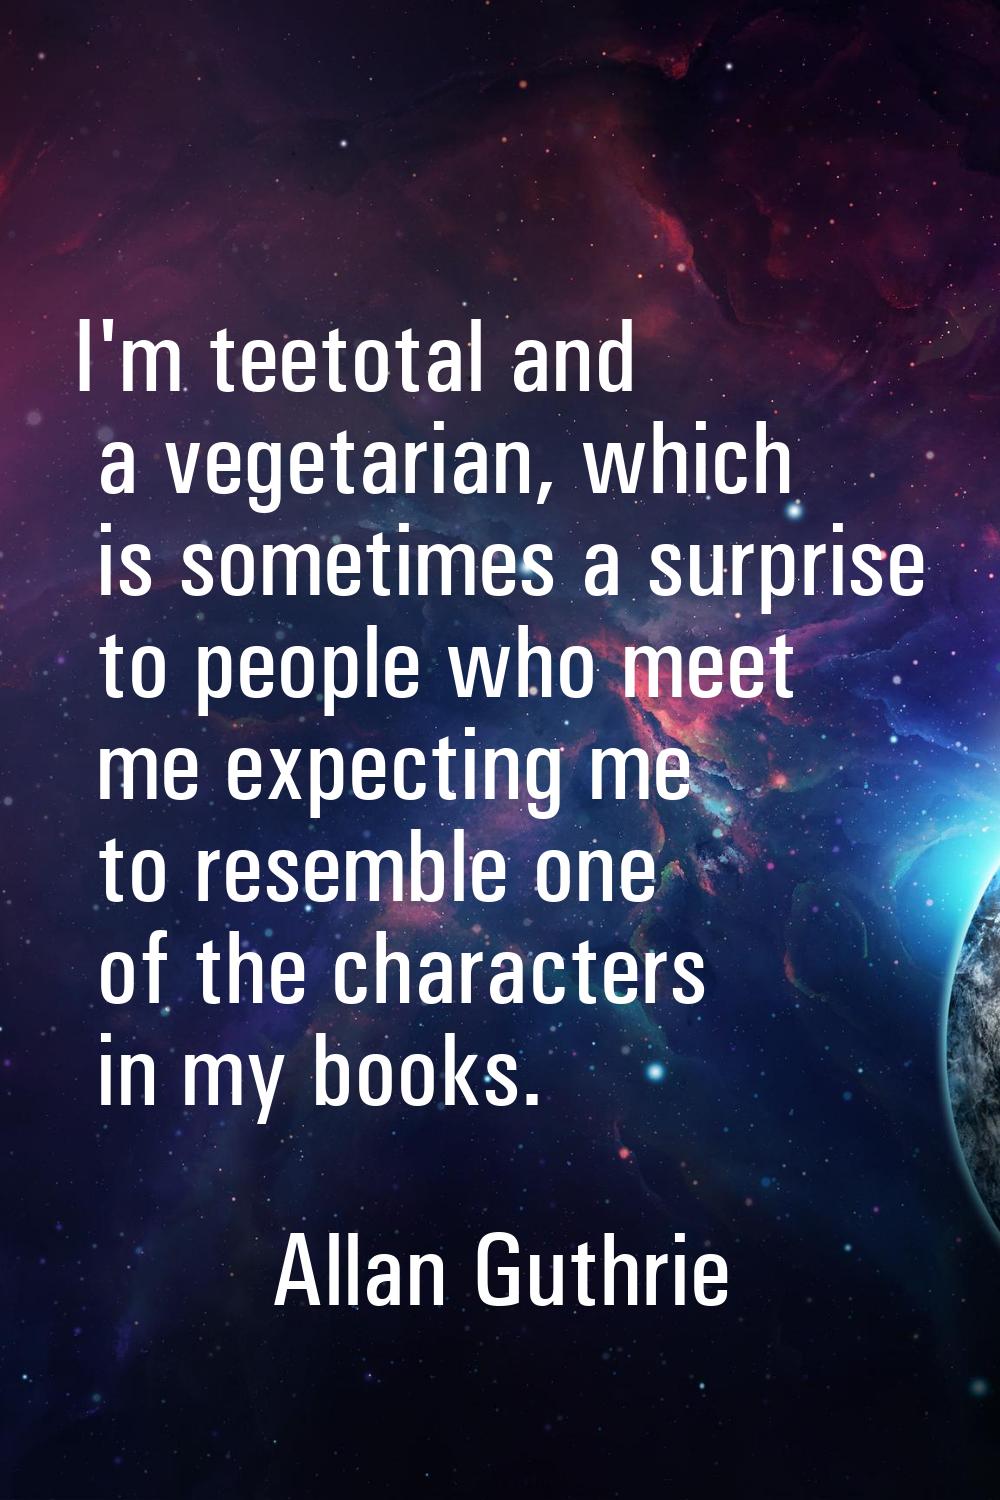 I'm teetotal and a vegetarian, which is sometimes a surprise to people who meet me expecting me to 